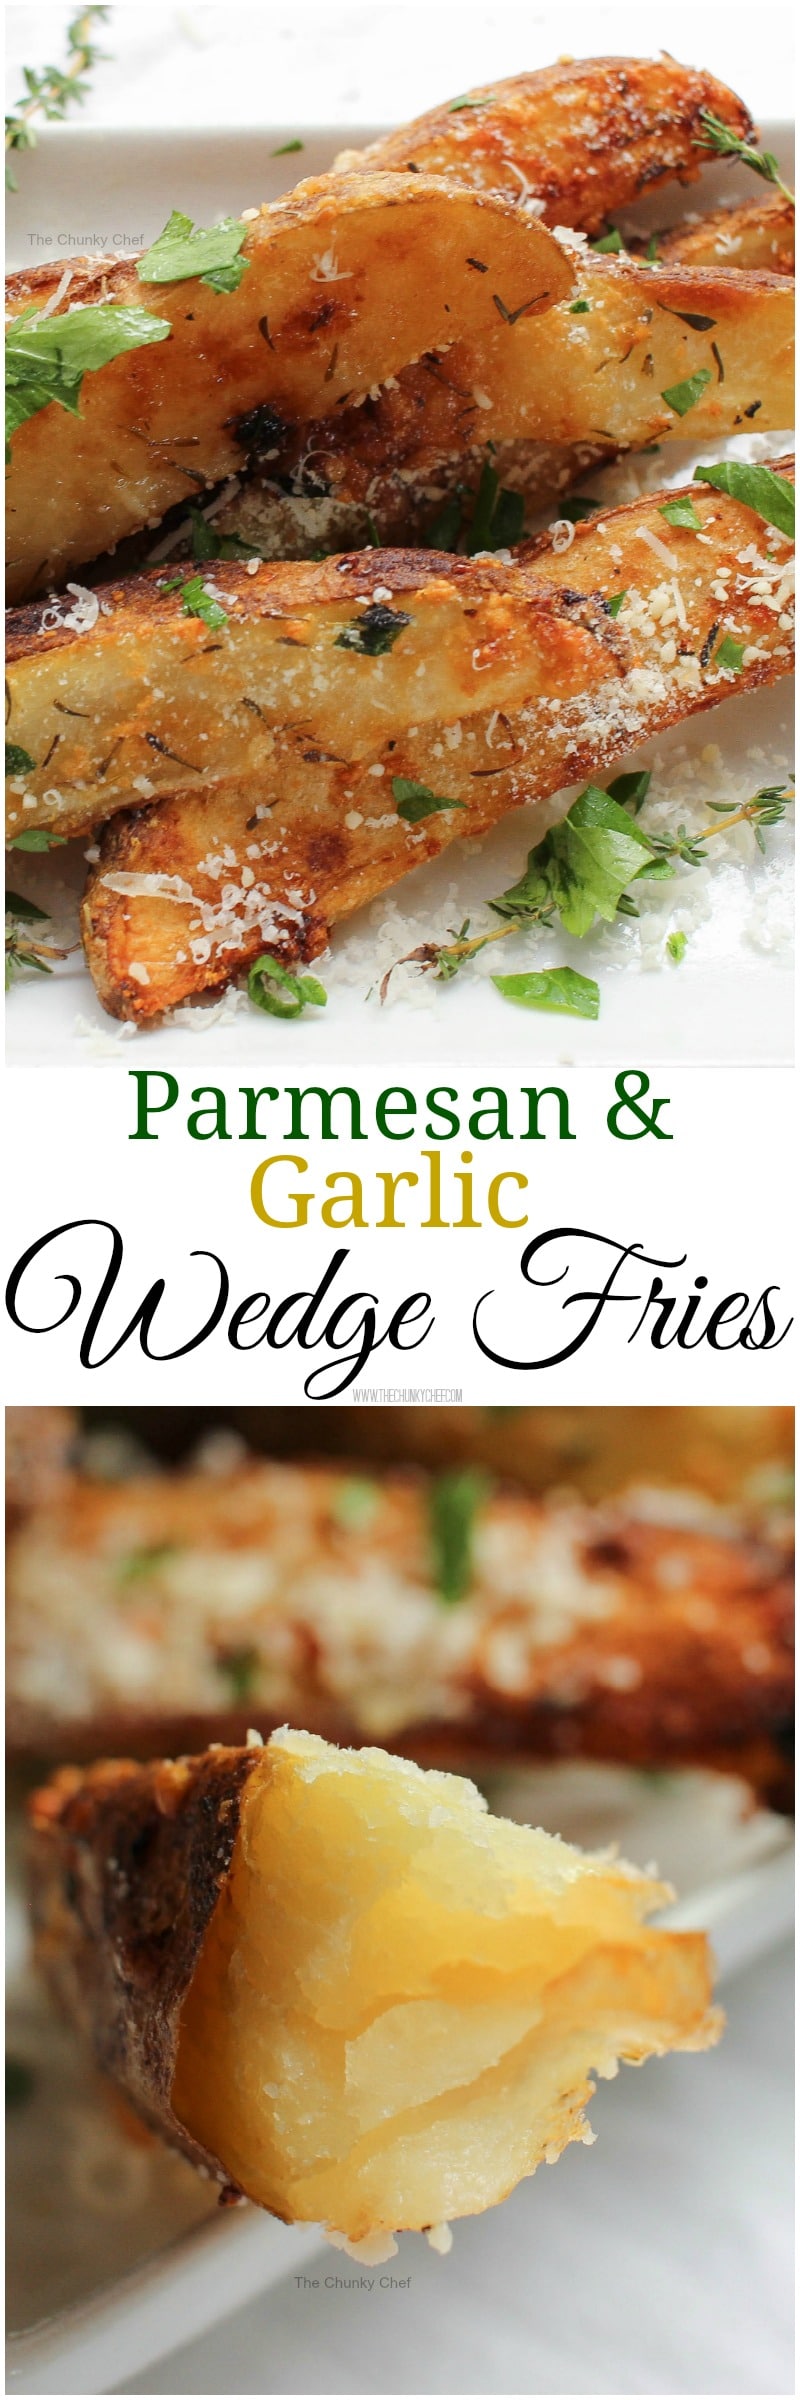 Parmesan and Garlic Wedge Fries - Sometimes you just want a good fry... deliciously crispy on the outside and hot and fluffy on the inside.  These wedge fries are seasoned to perfection!